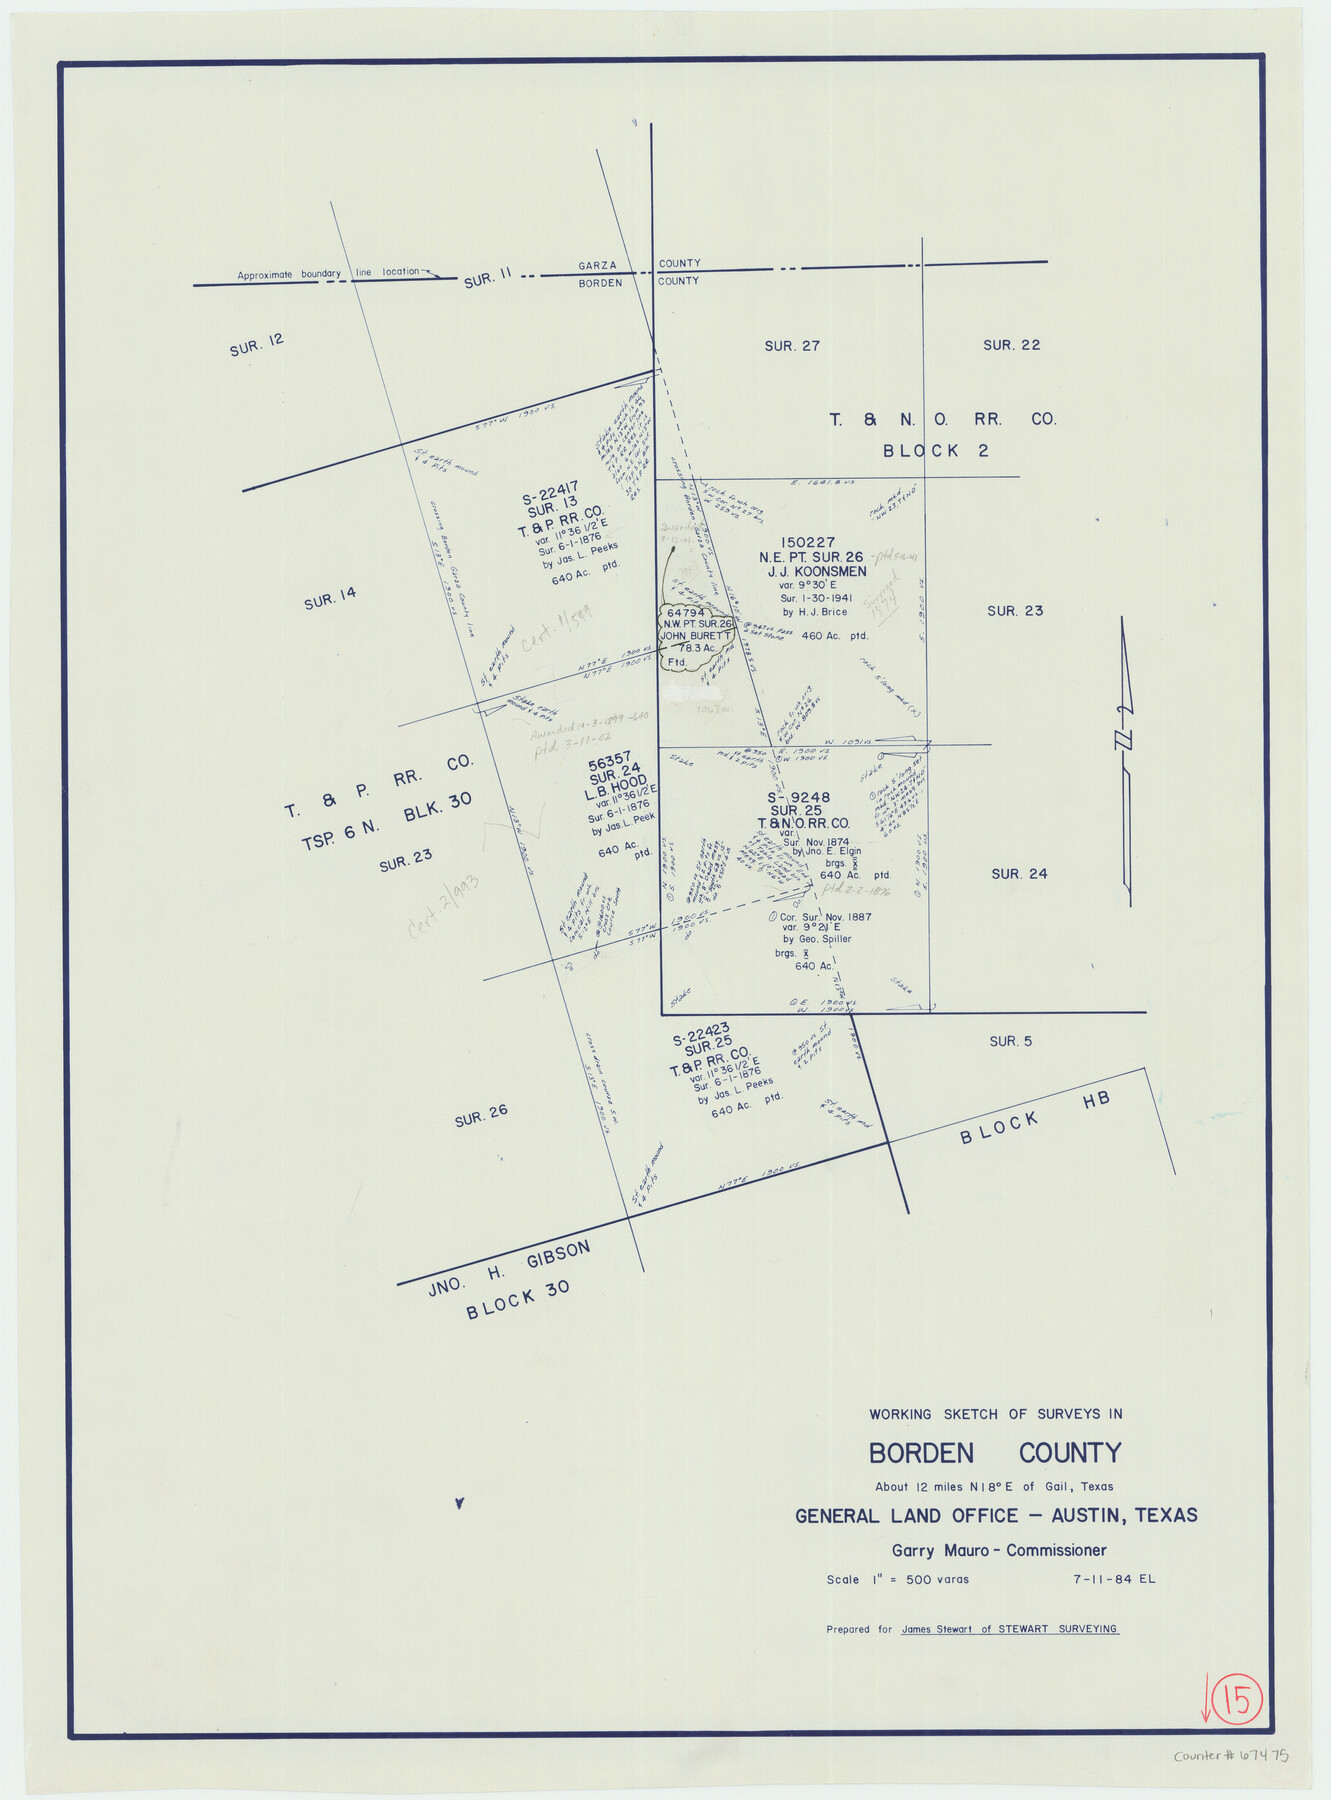 67475, Borden County Working Sketch 15, General Map Collection